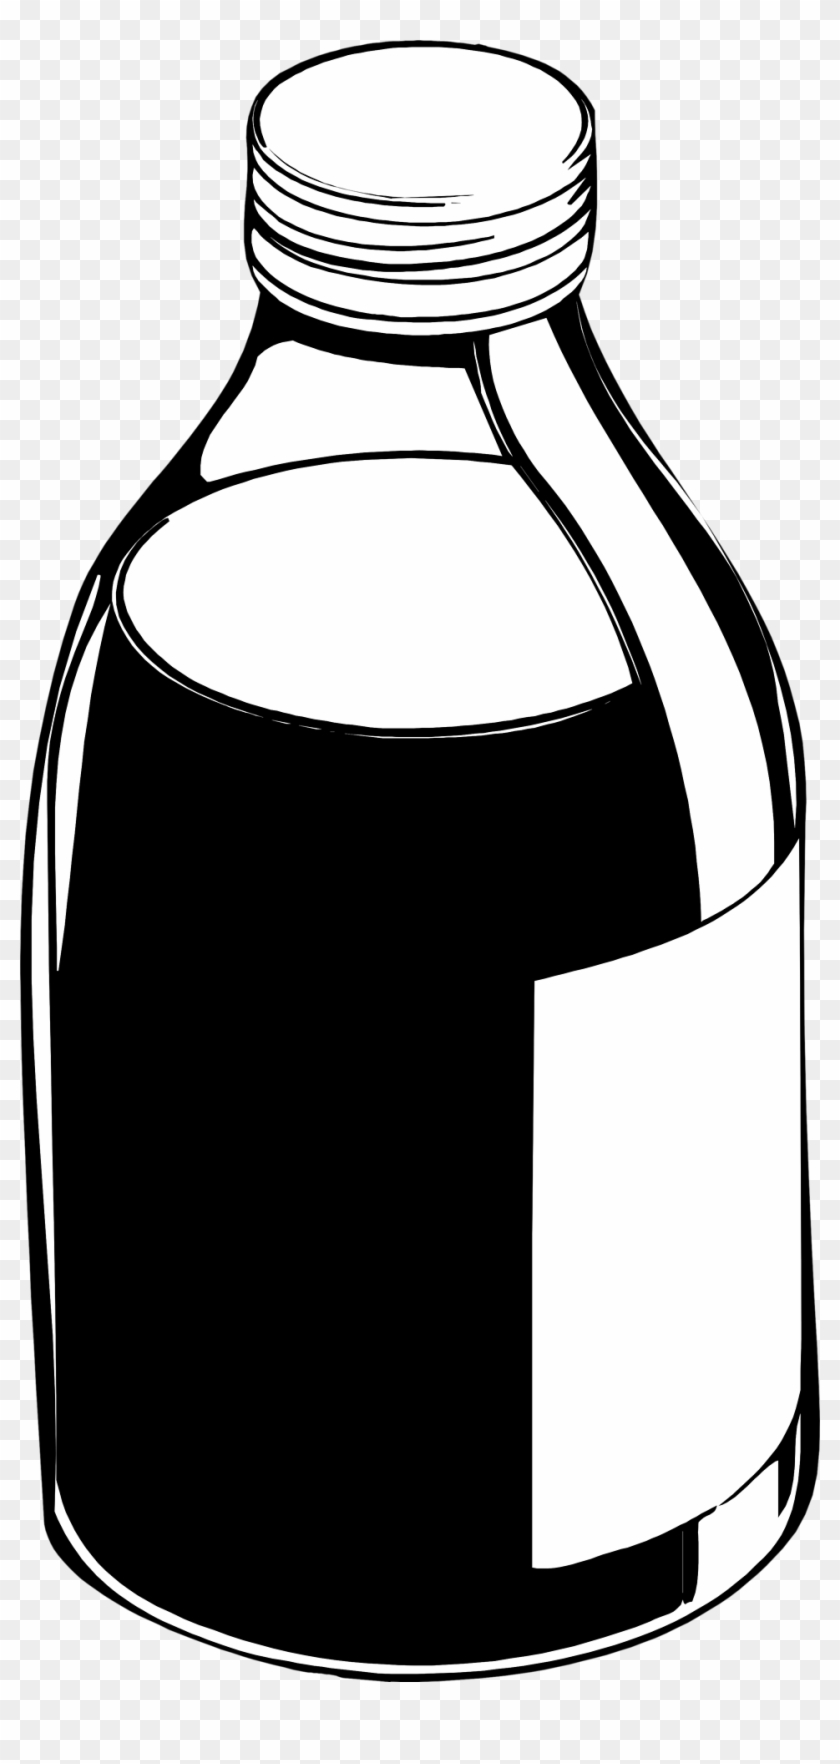 Medicine Bottle Clipart - Medicine Bottle Clipart Black And White #101467